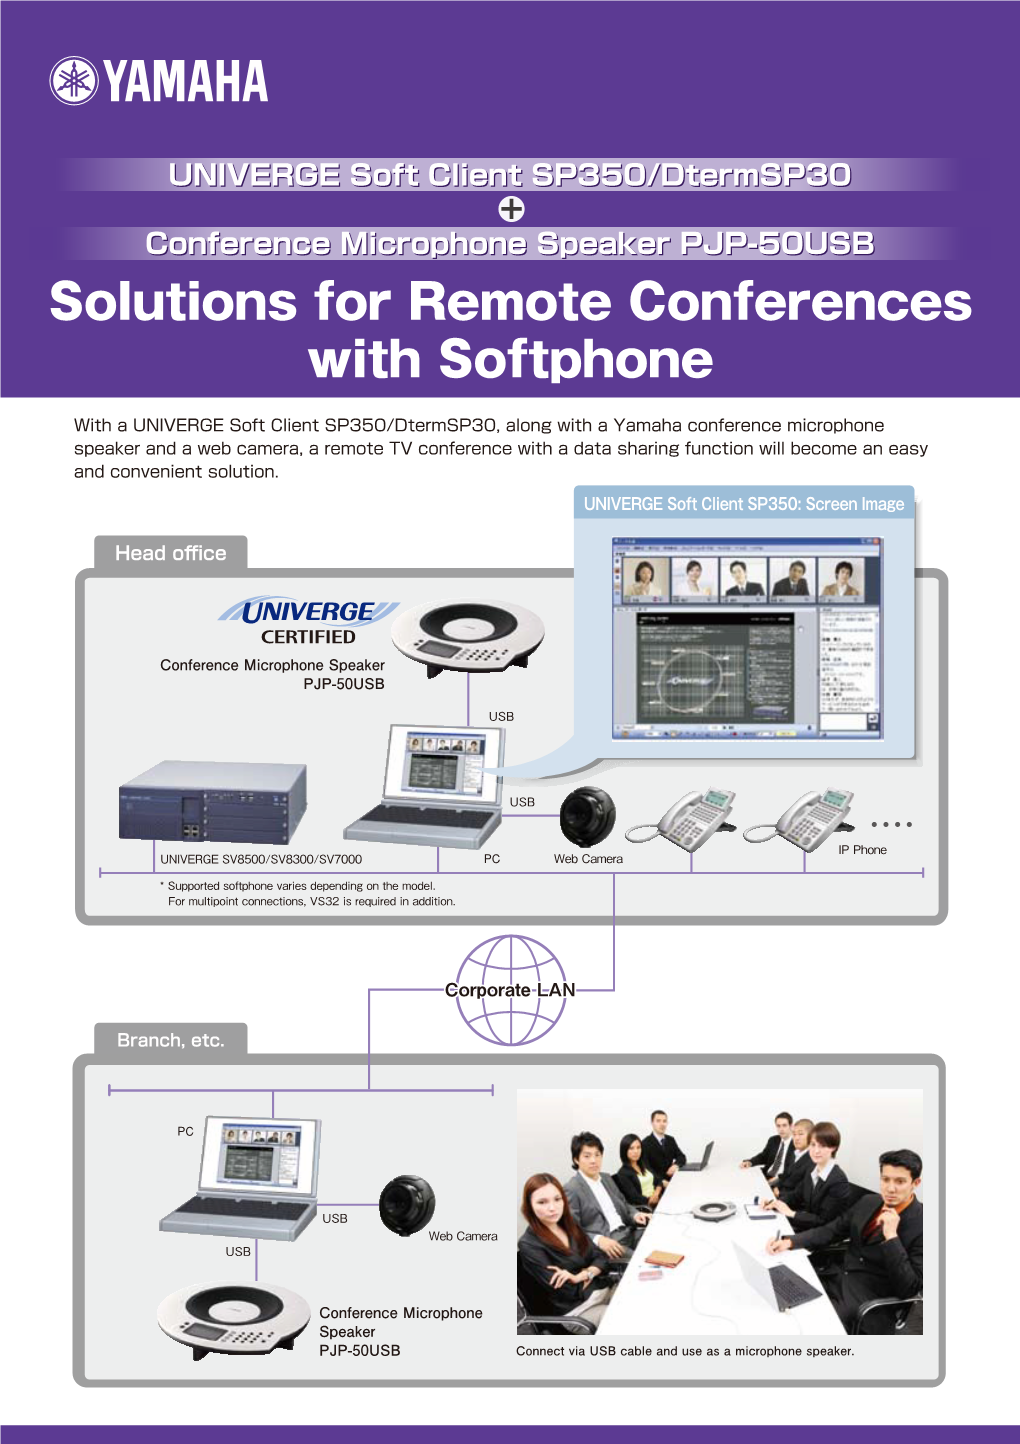 Solutions for Remote Conferences with Softphone